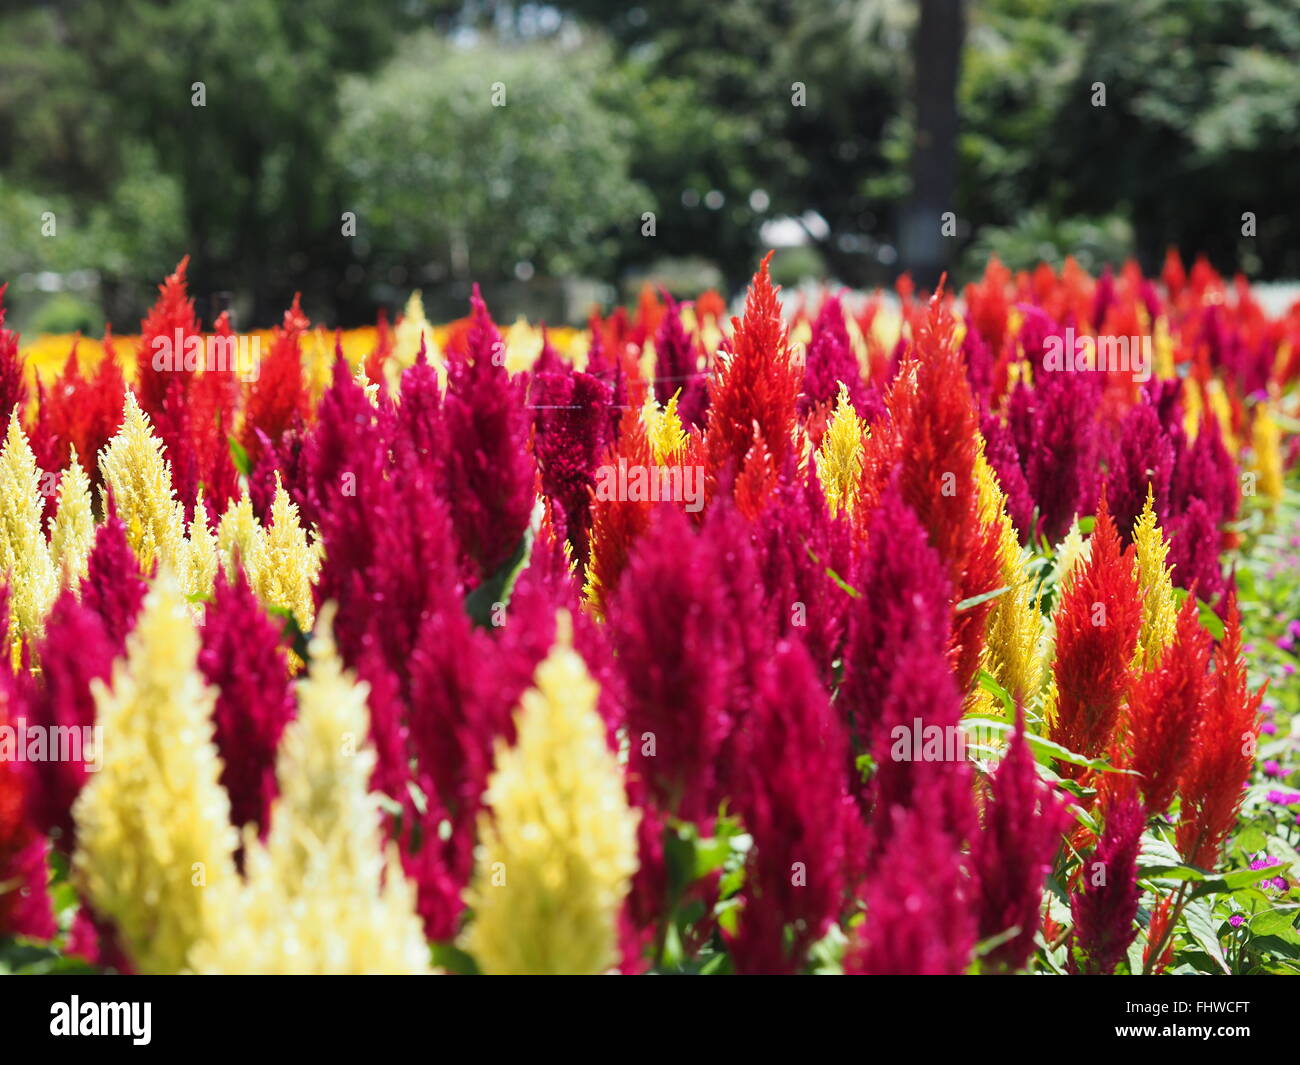 Red, purple and white flowers in garden bed in large garden or park setting with room for header Stock Photo